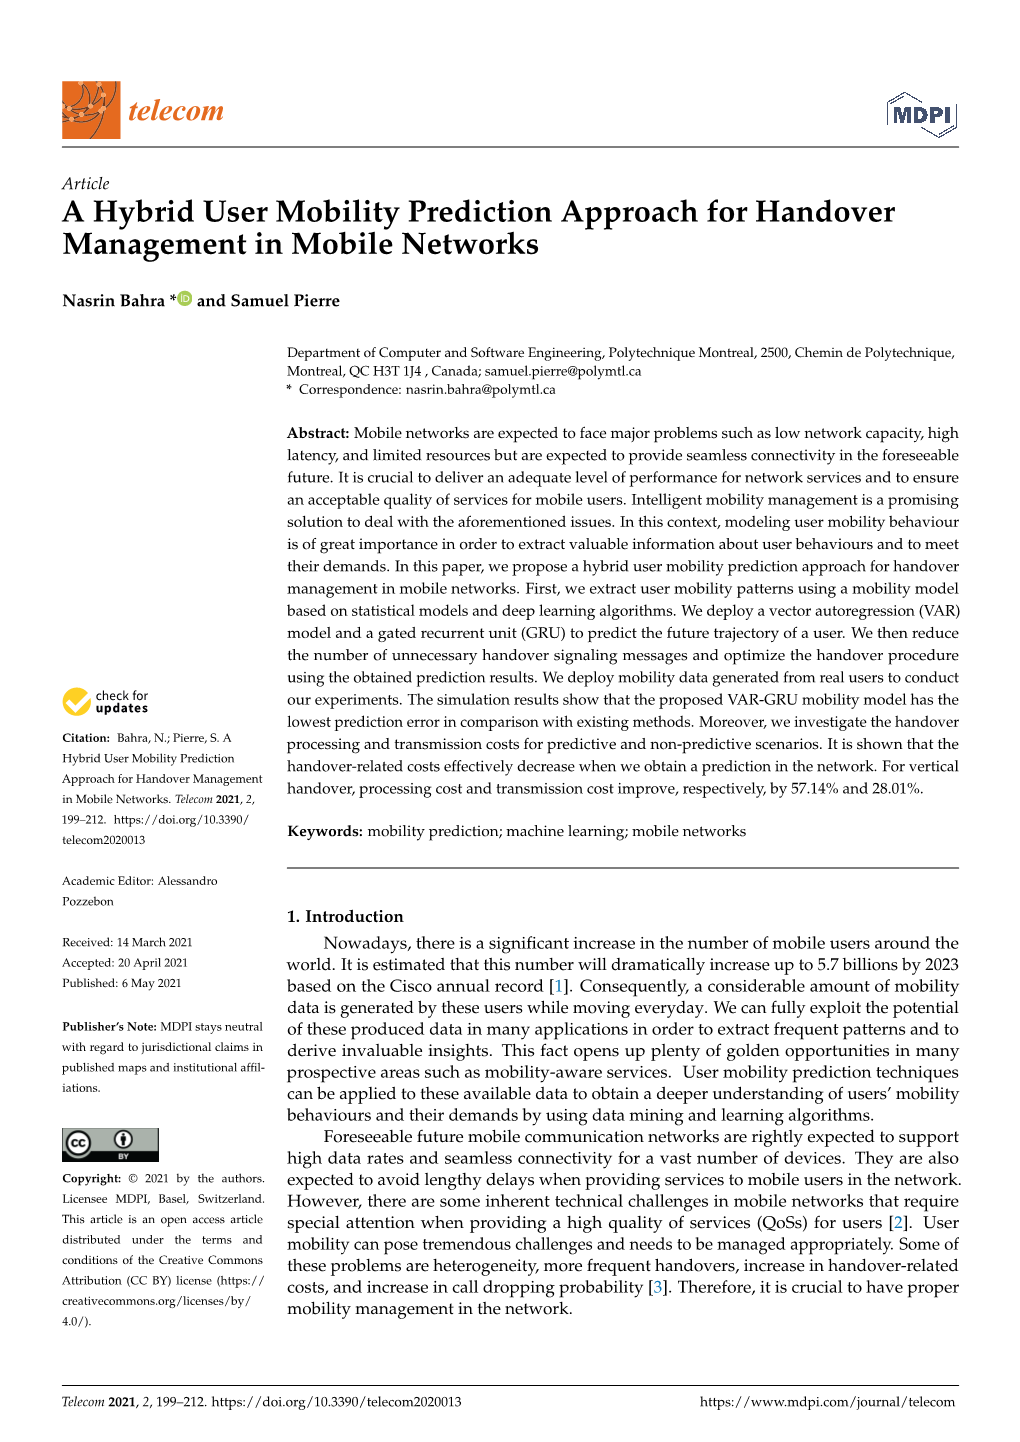 A Hybrid User Mobility Prediction Approach for Handover Management in Mobile Networks